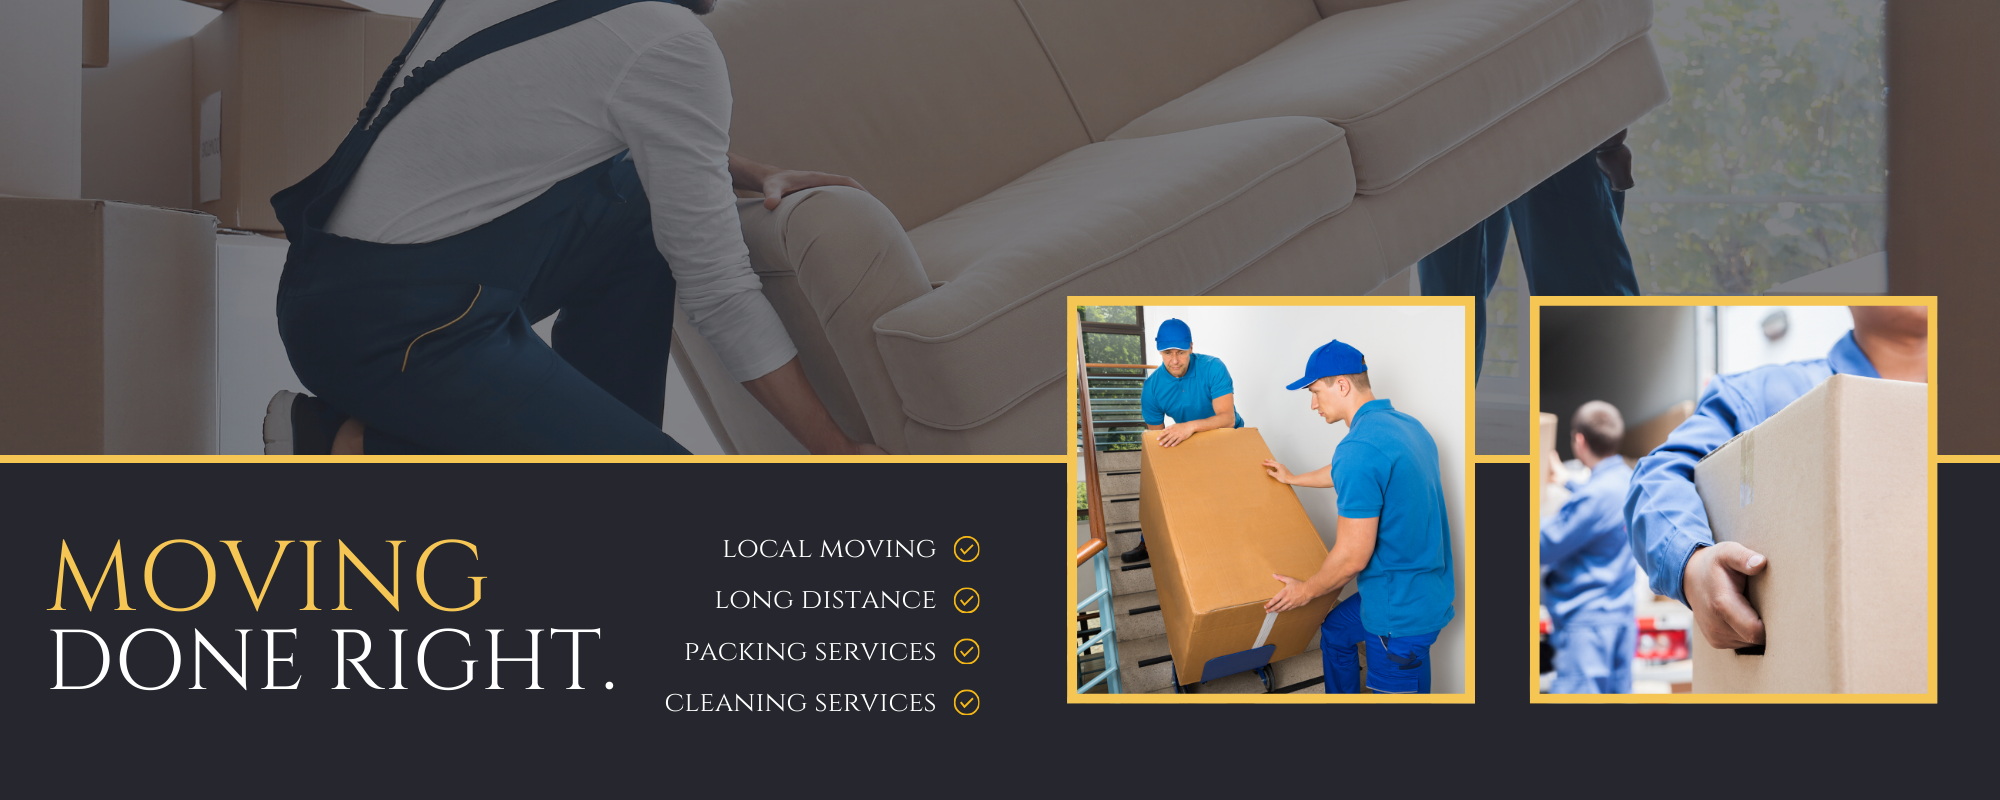 moving company collage